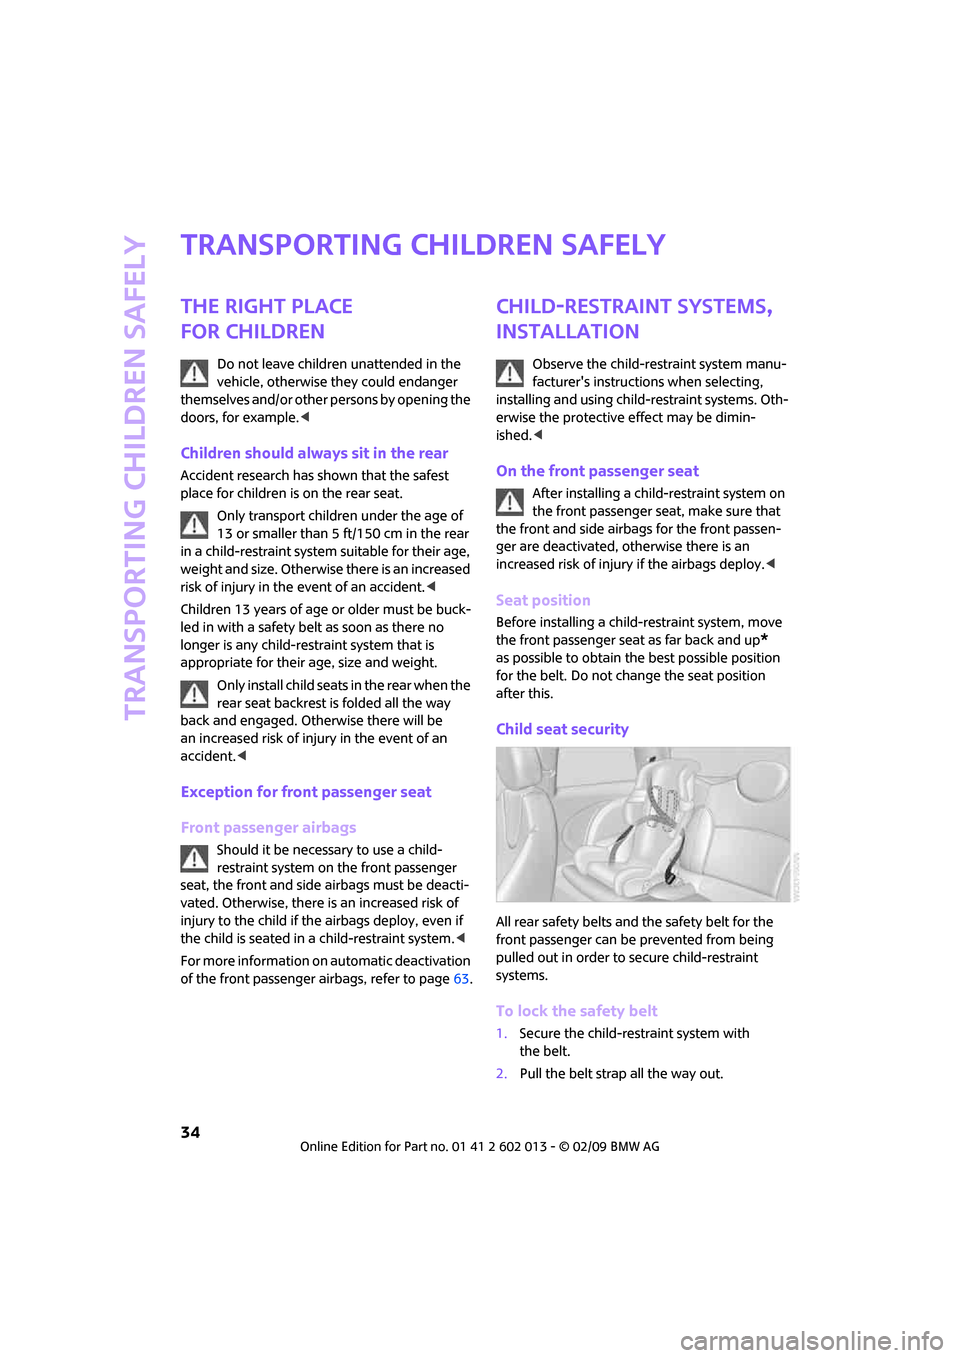 MINI Clubman 2009  Owners Manual Transporting children safely
34
Transporting children safely
The right place 
for children
Do not leave children unattended in the 
vehicle, otherwise they could endanger 
themselves and/or other pers